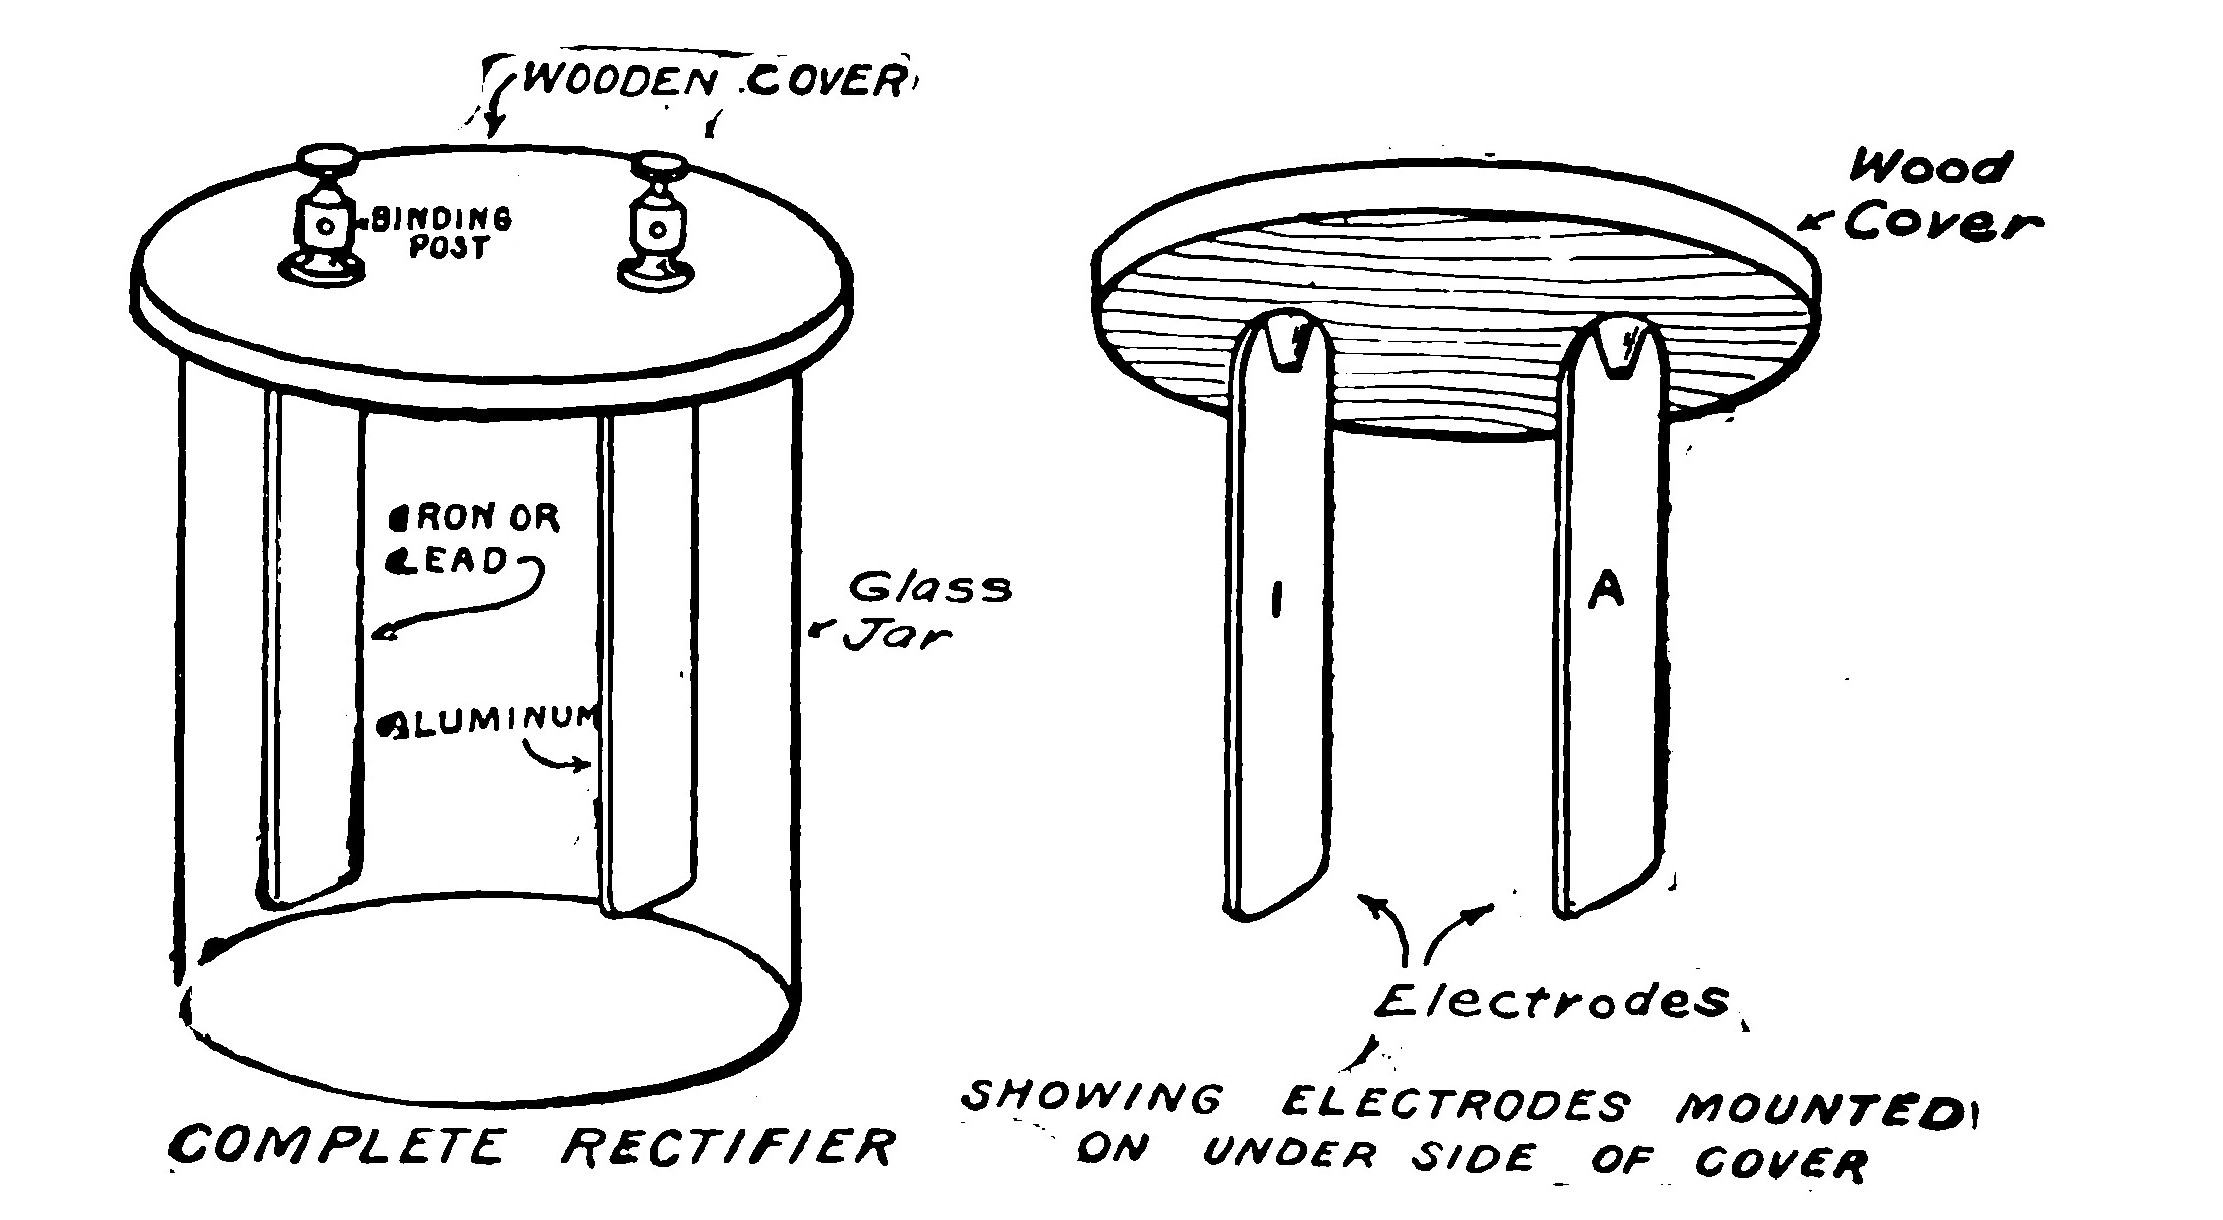 FIG. 52.—A completed single Cell Rectifier.